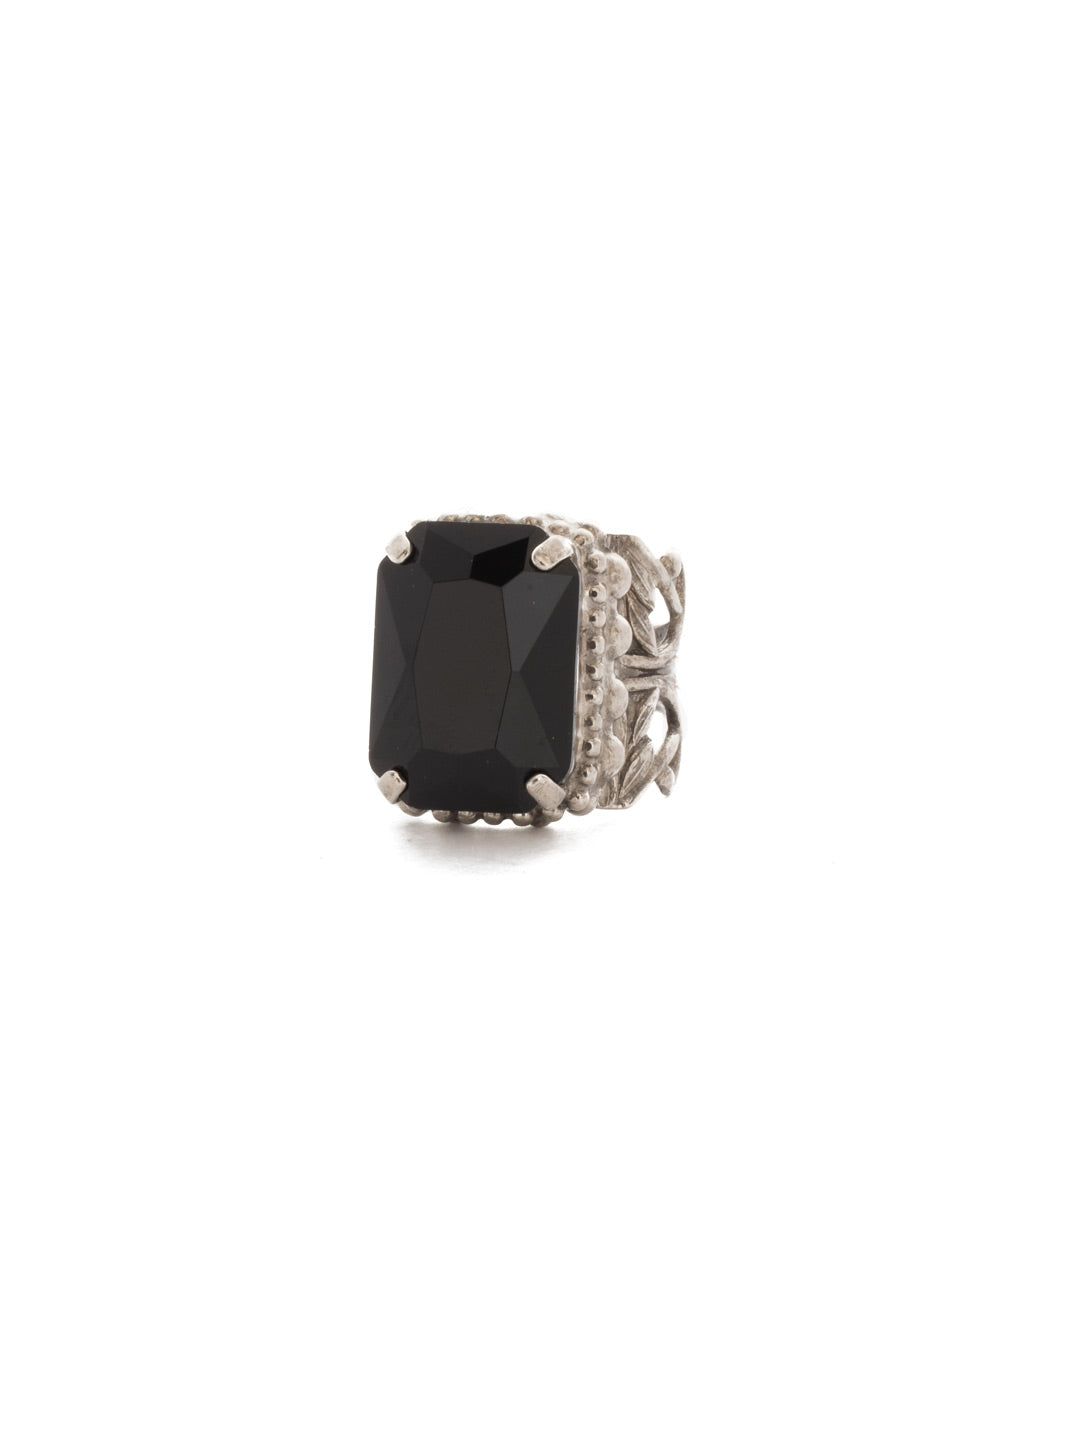 Brynn Cocktail Ring - RDG32ASBON - A large emerald cut crystal set in a wide band provides a modern take on a classic style. From Sorrelli's Black Onyx collection in our Antique Silver-tone finish.